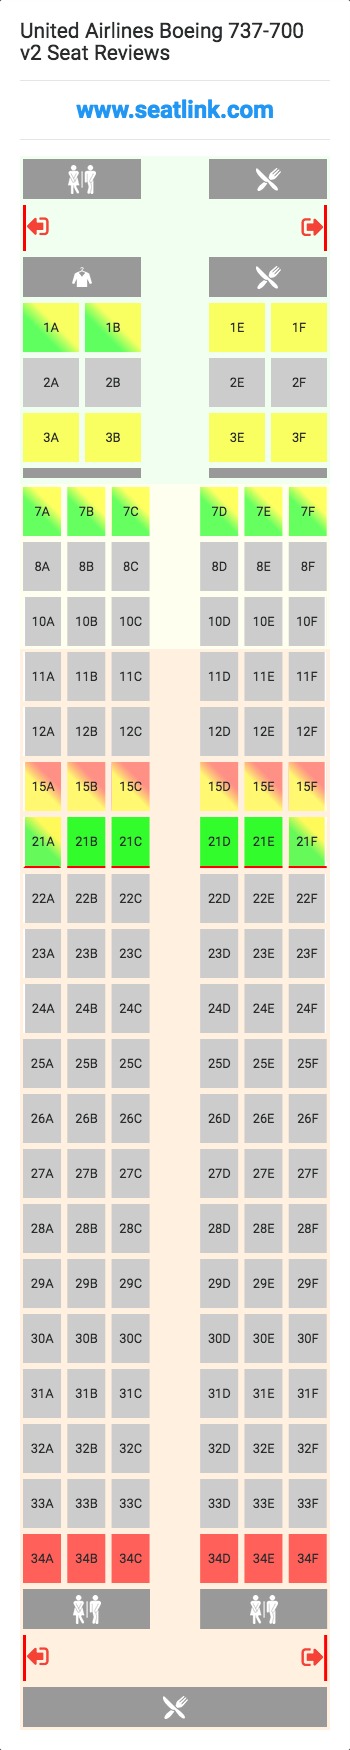 United Airlines Boeing 737-700 v2 (73G) Seat Map